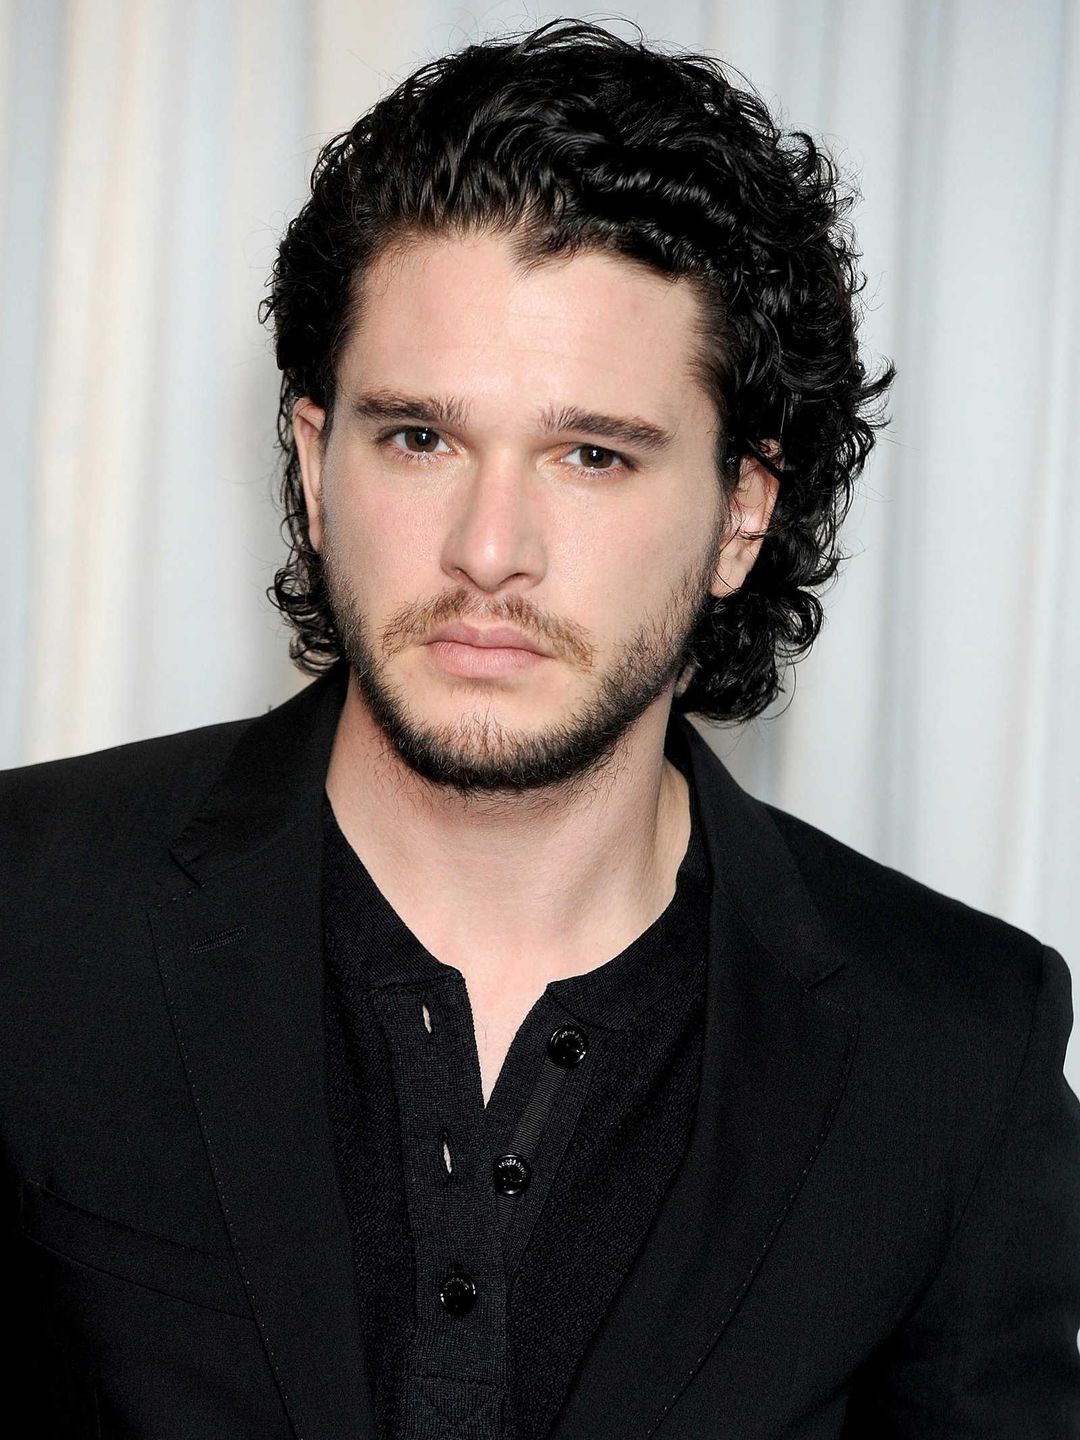 Kit Harington does he have a wife